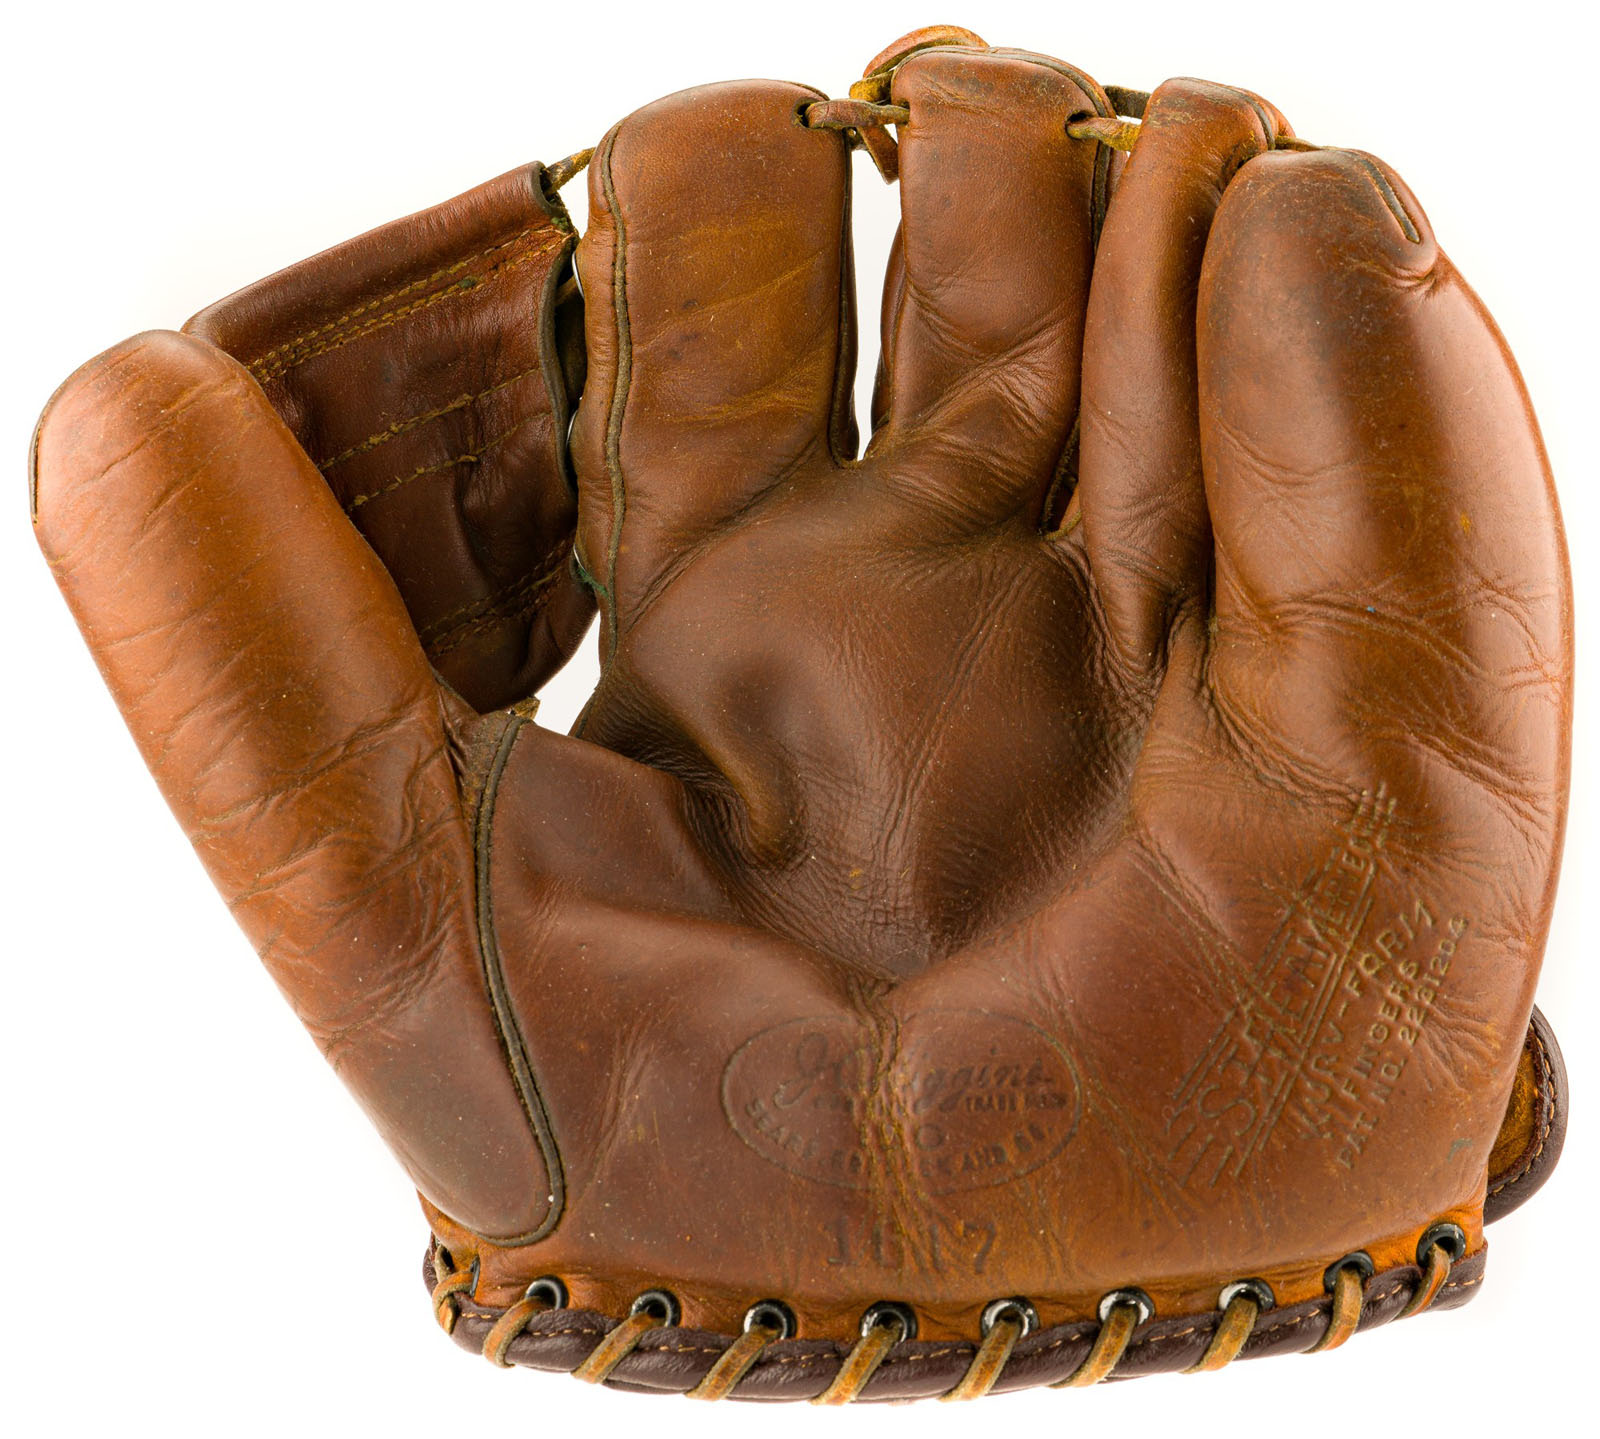 Jackie Robinson's old glove sells for $373,000 at auction - NBC Sports